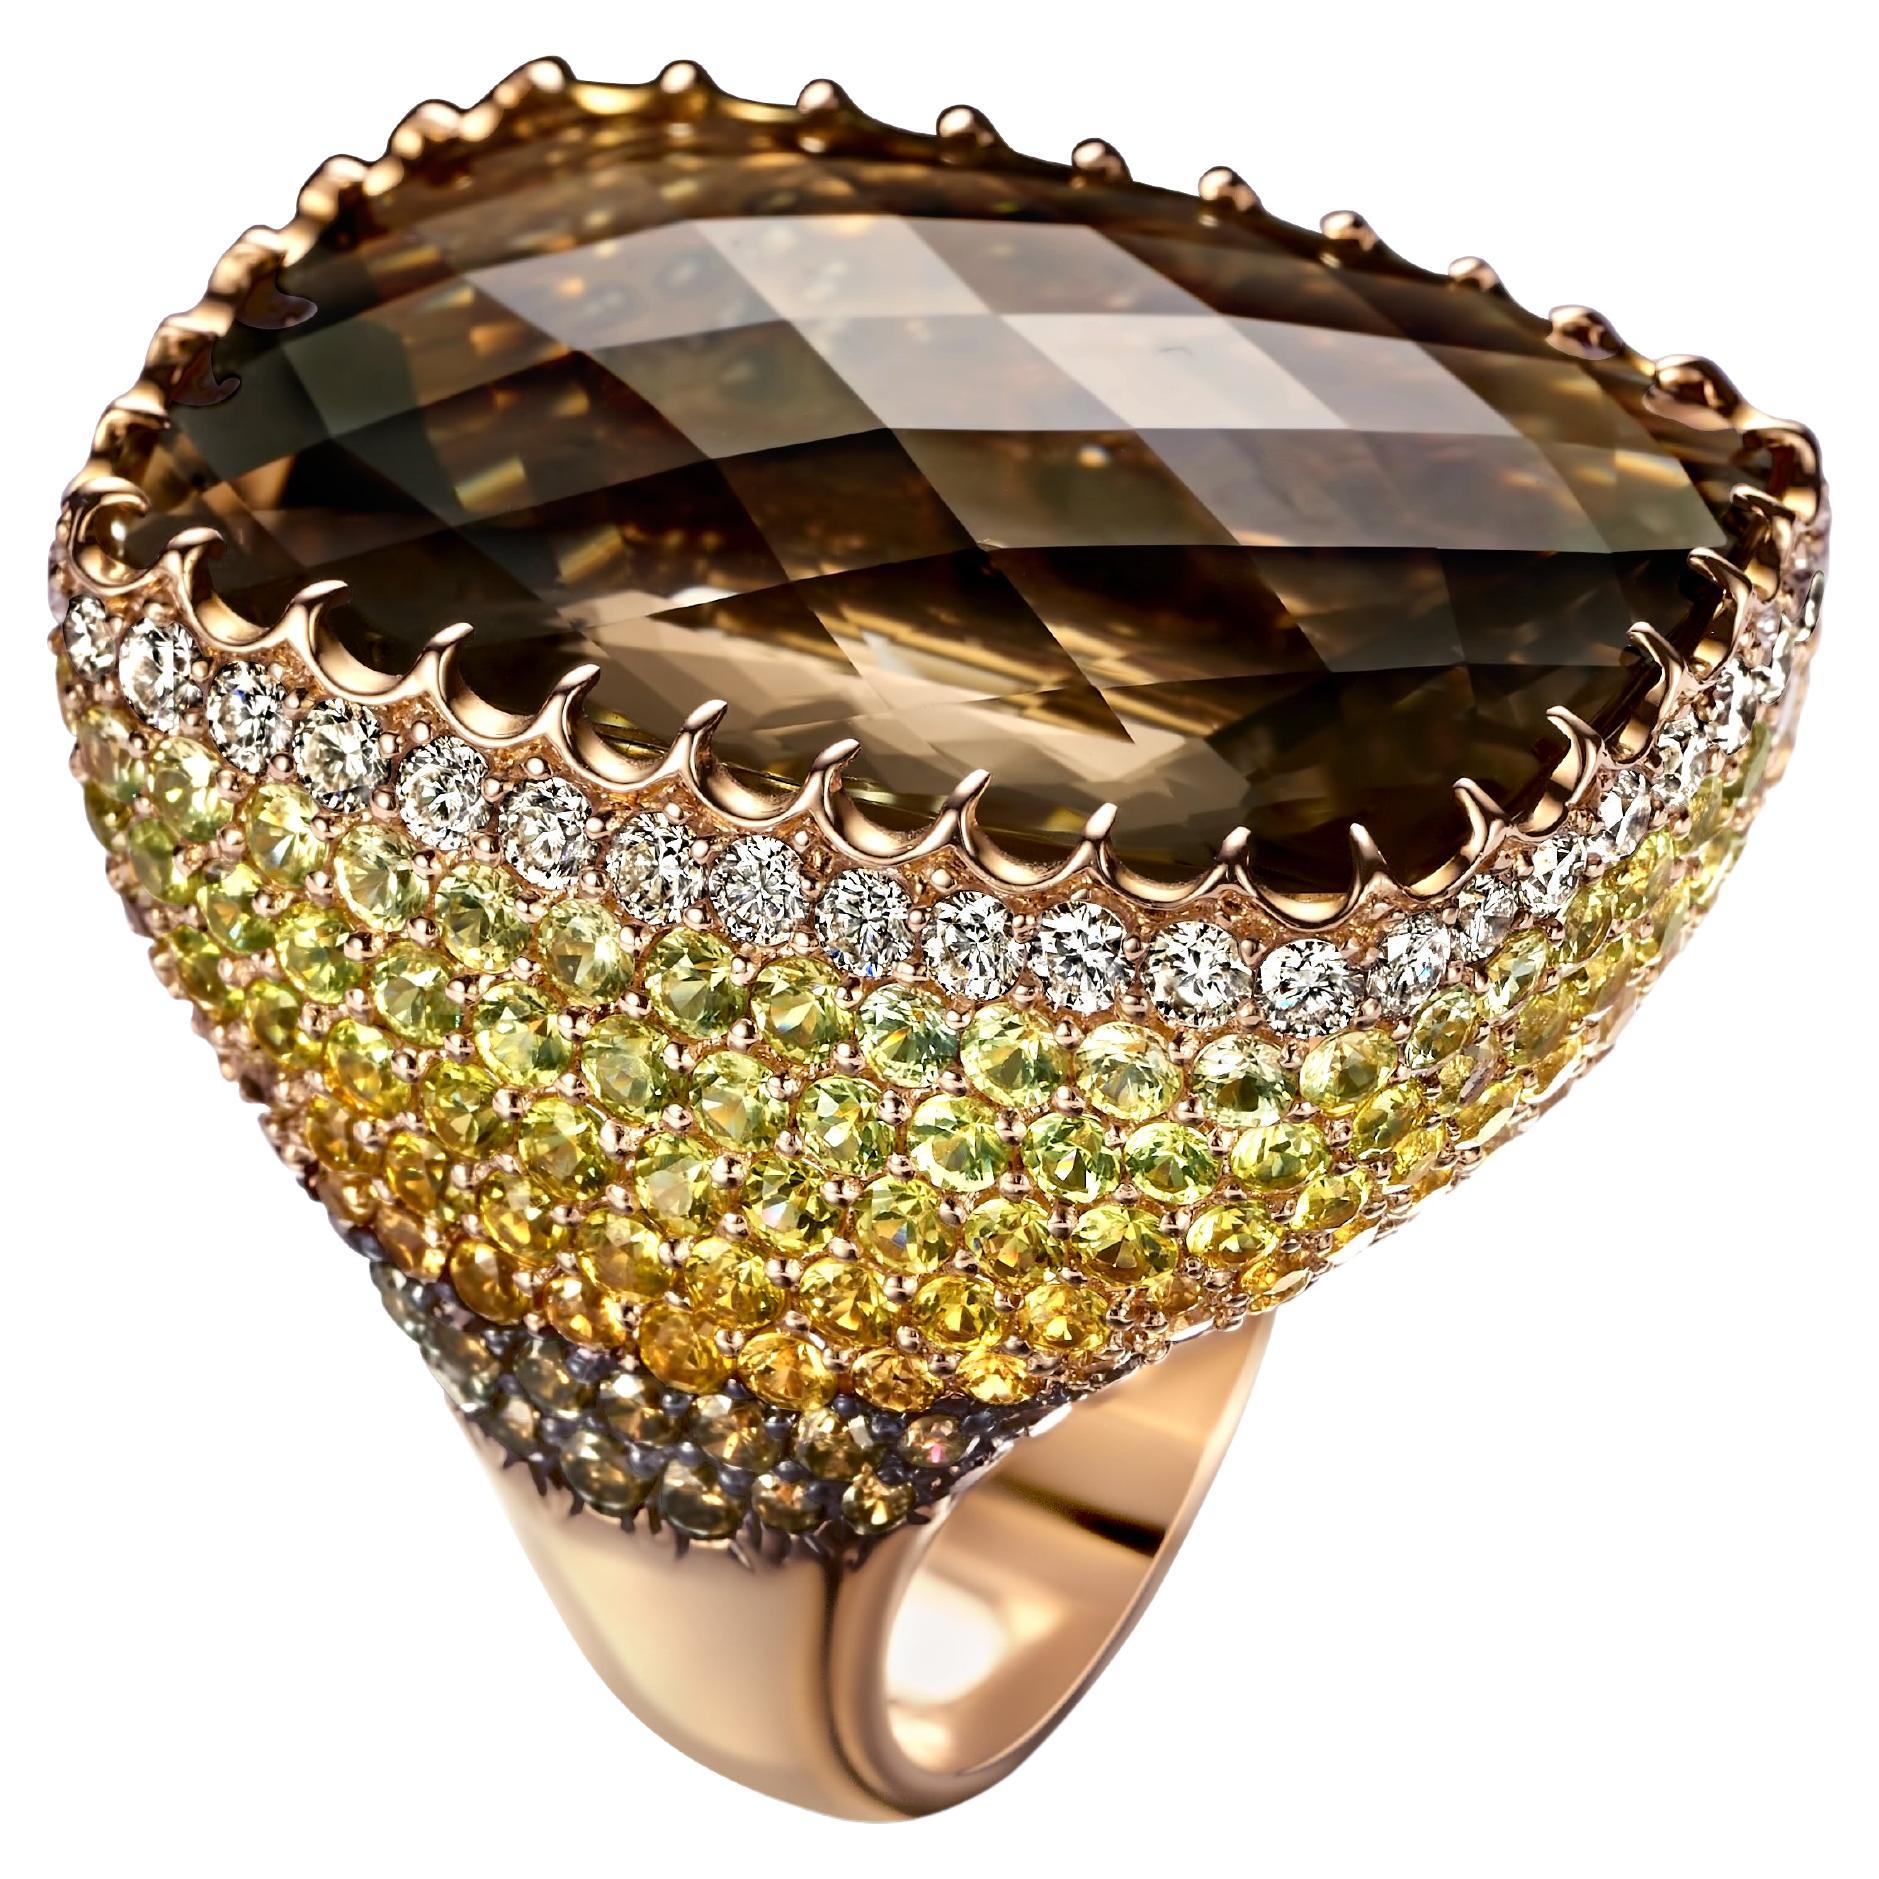 18kt Pink Gold Ring with a Large 36.5ct Topaz, 7.49ct Yellow Sapphires, Diamonds For Sale